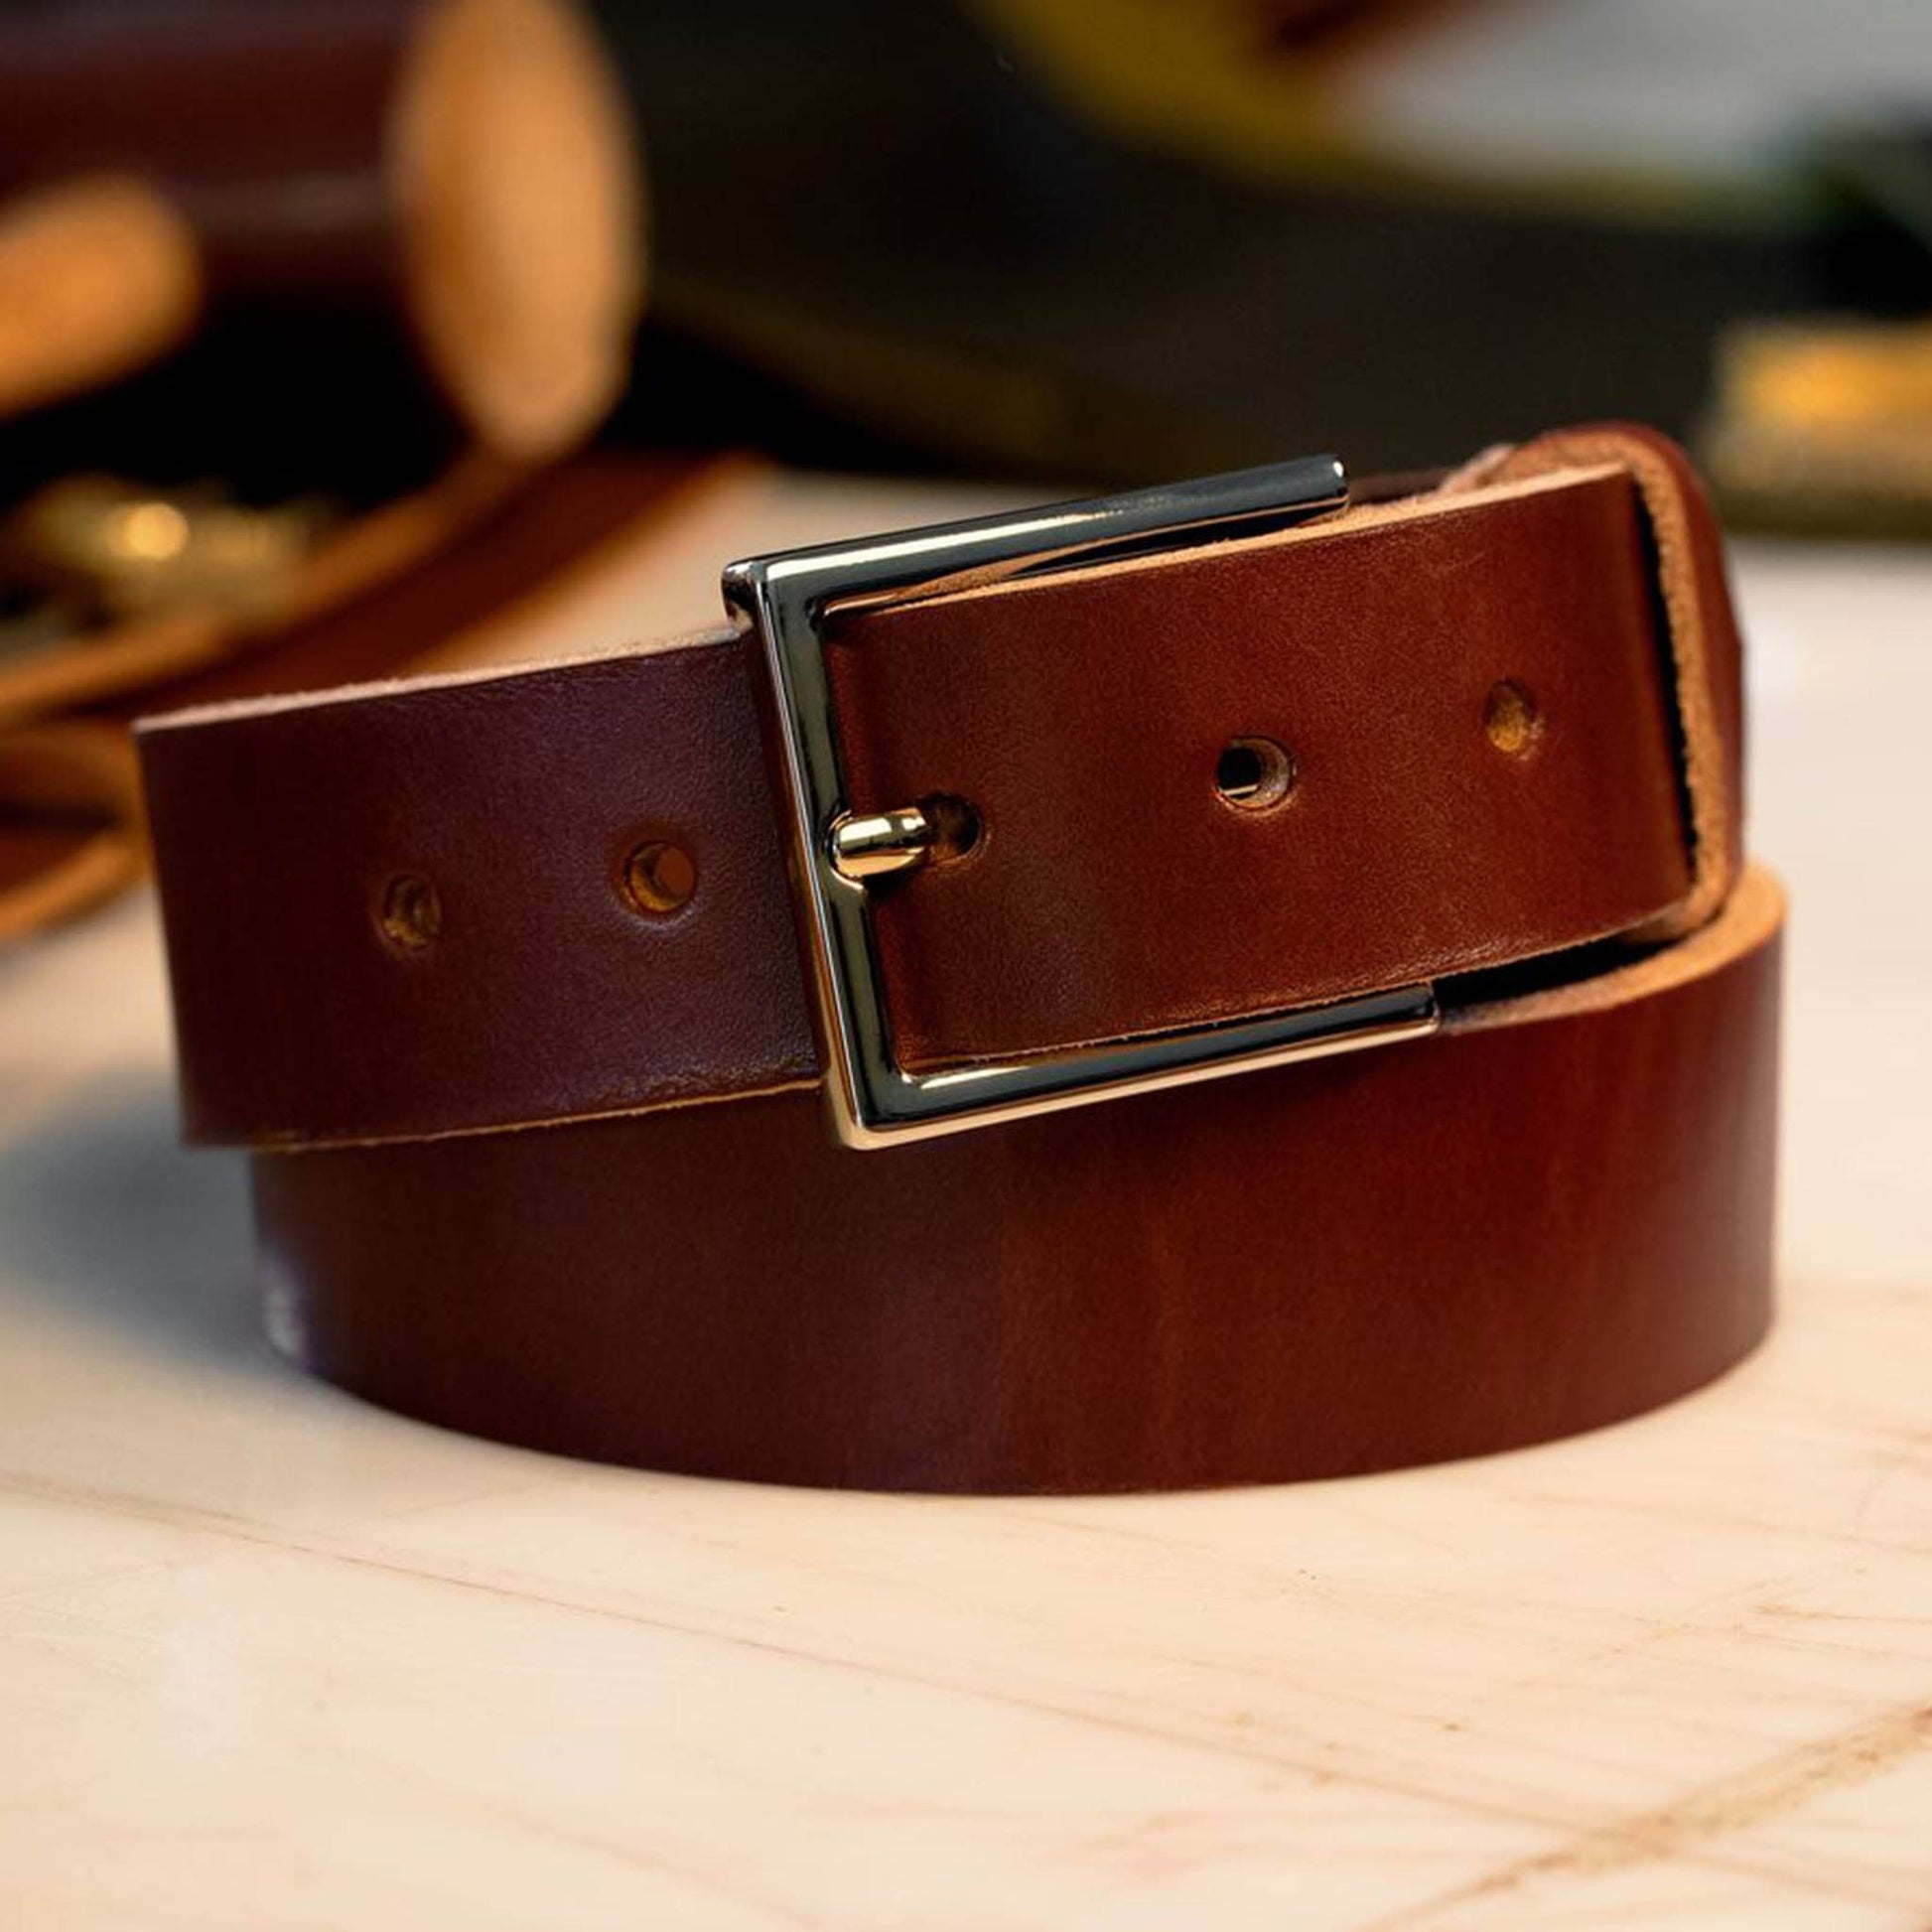 British Brown leather belt with a chrome dress buckle.